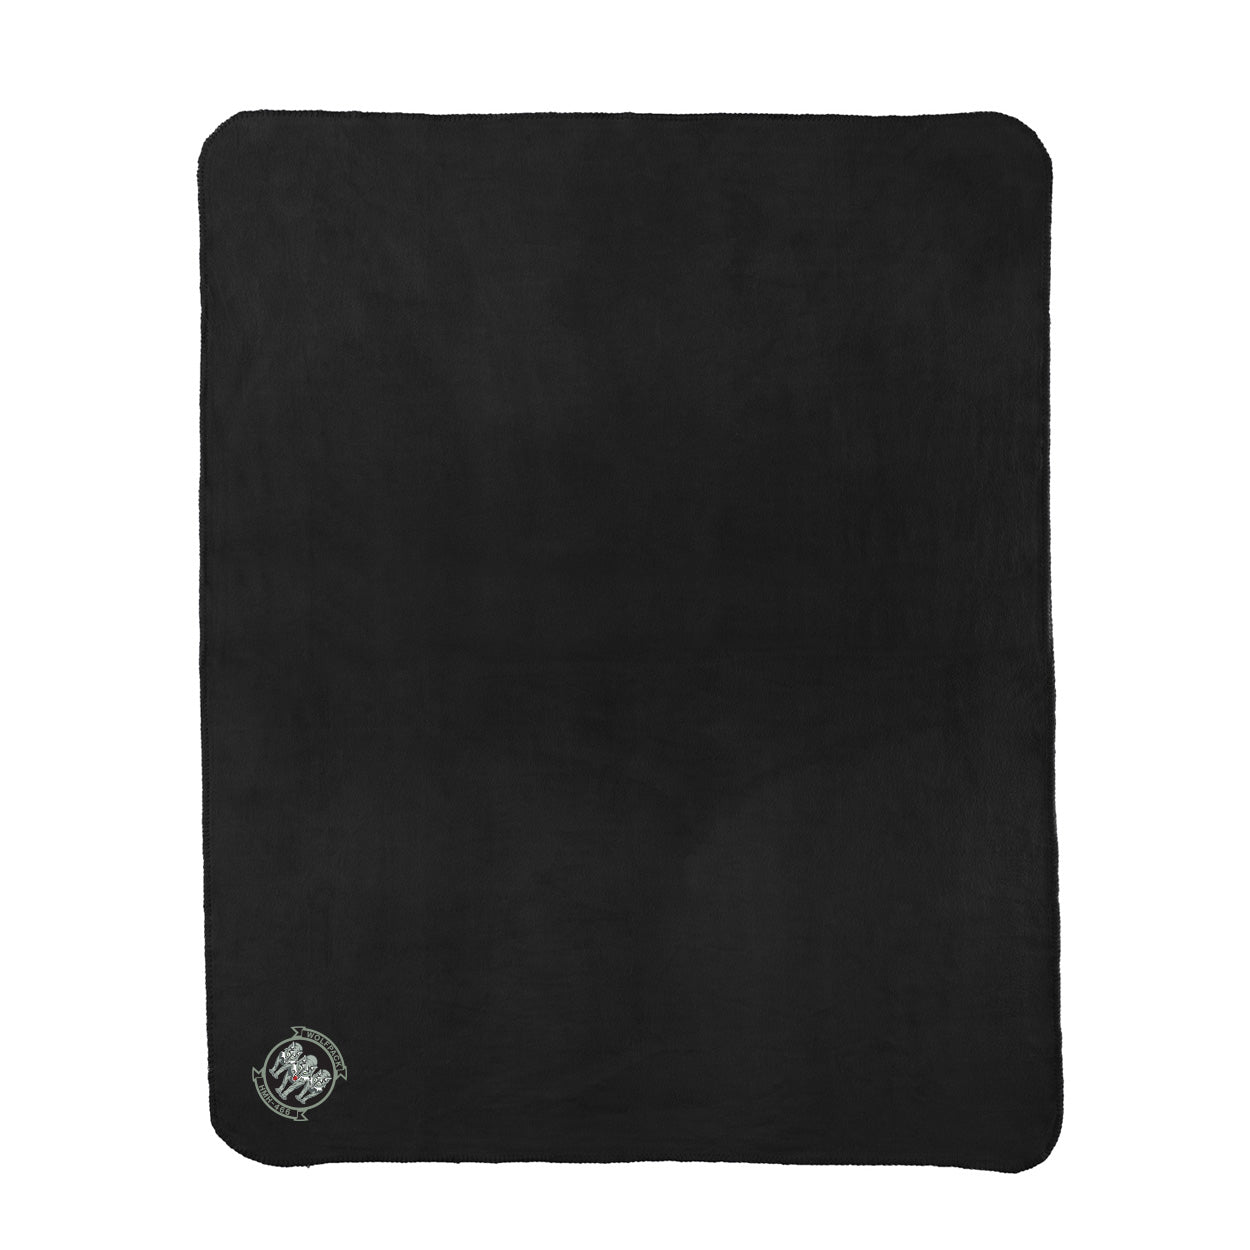 HMH-466 OFFICIAL PATCH EMBROIDERED BLANKET